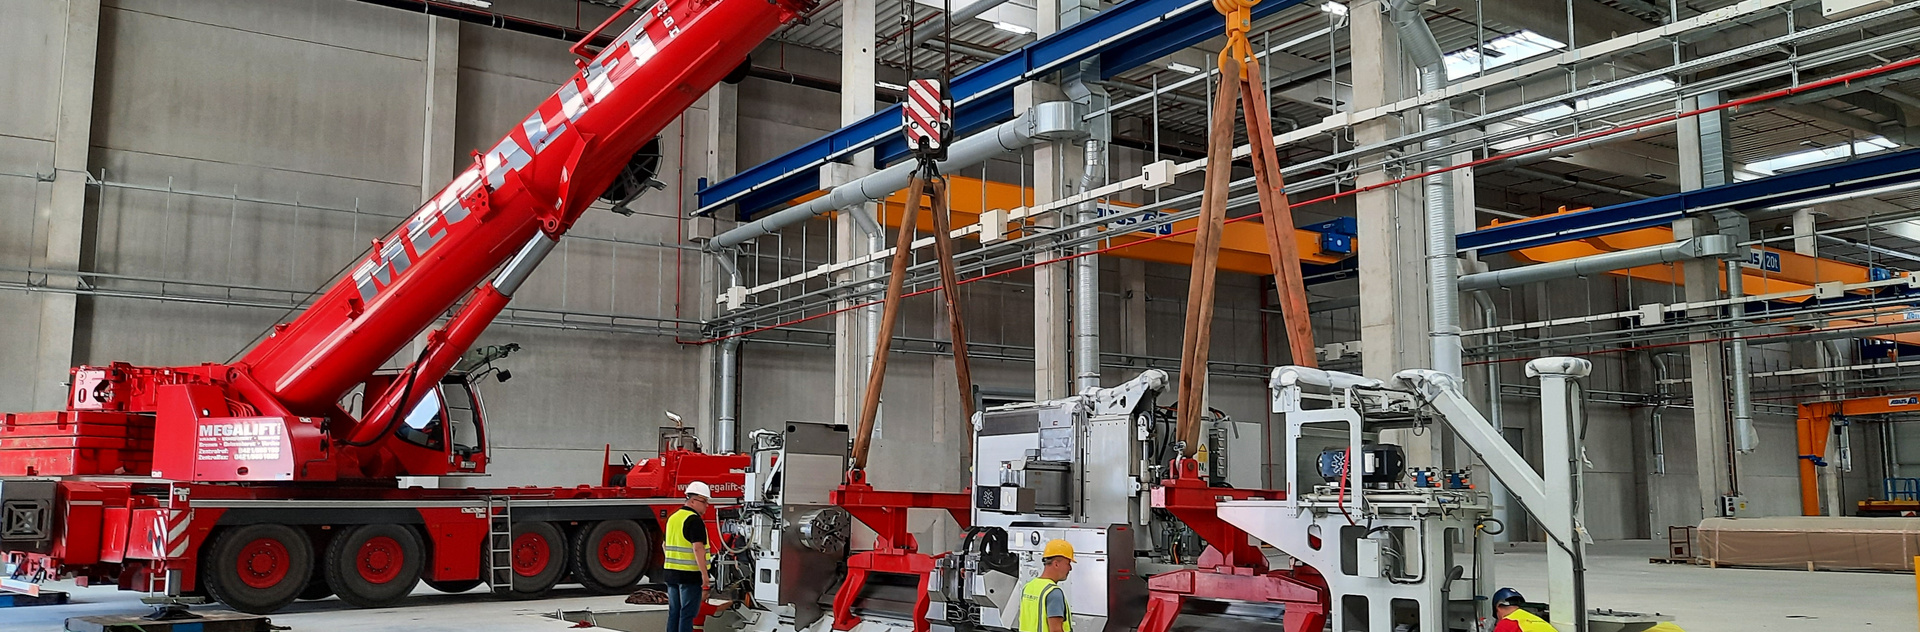 The first machine in Hanover is dismantled and prepared for transport to Laatzen